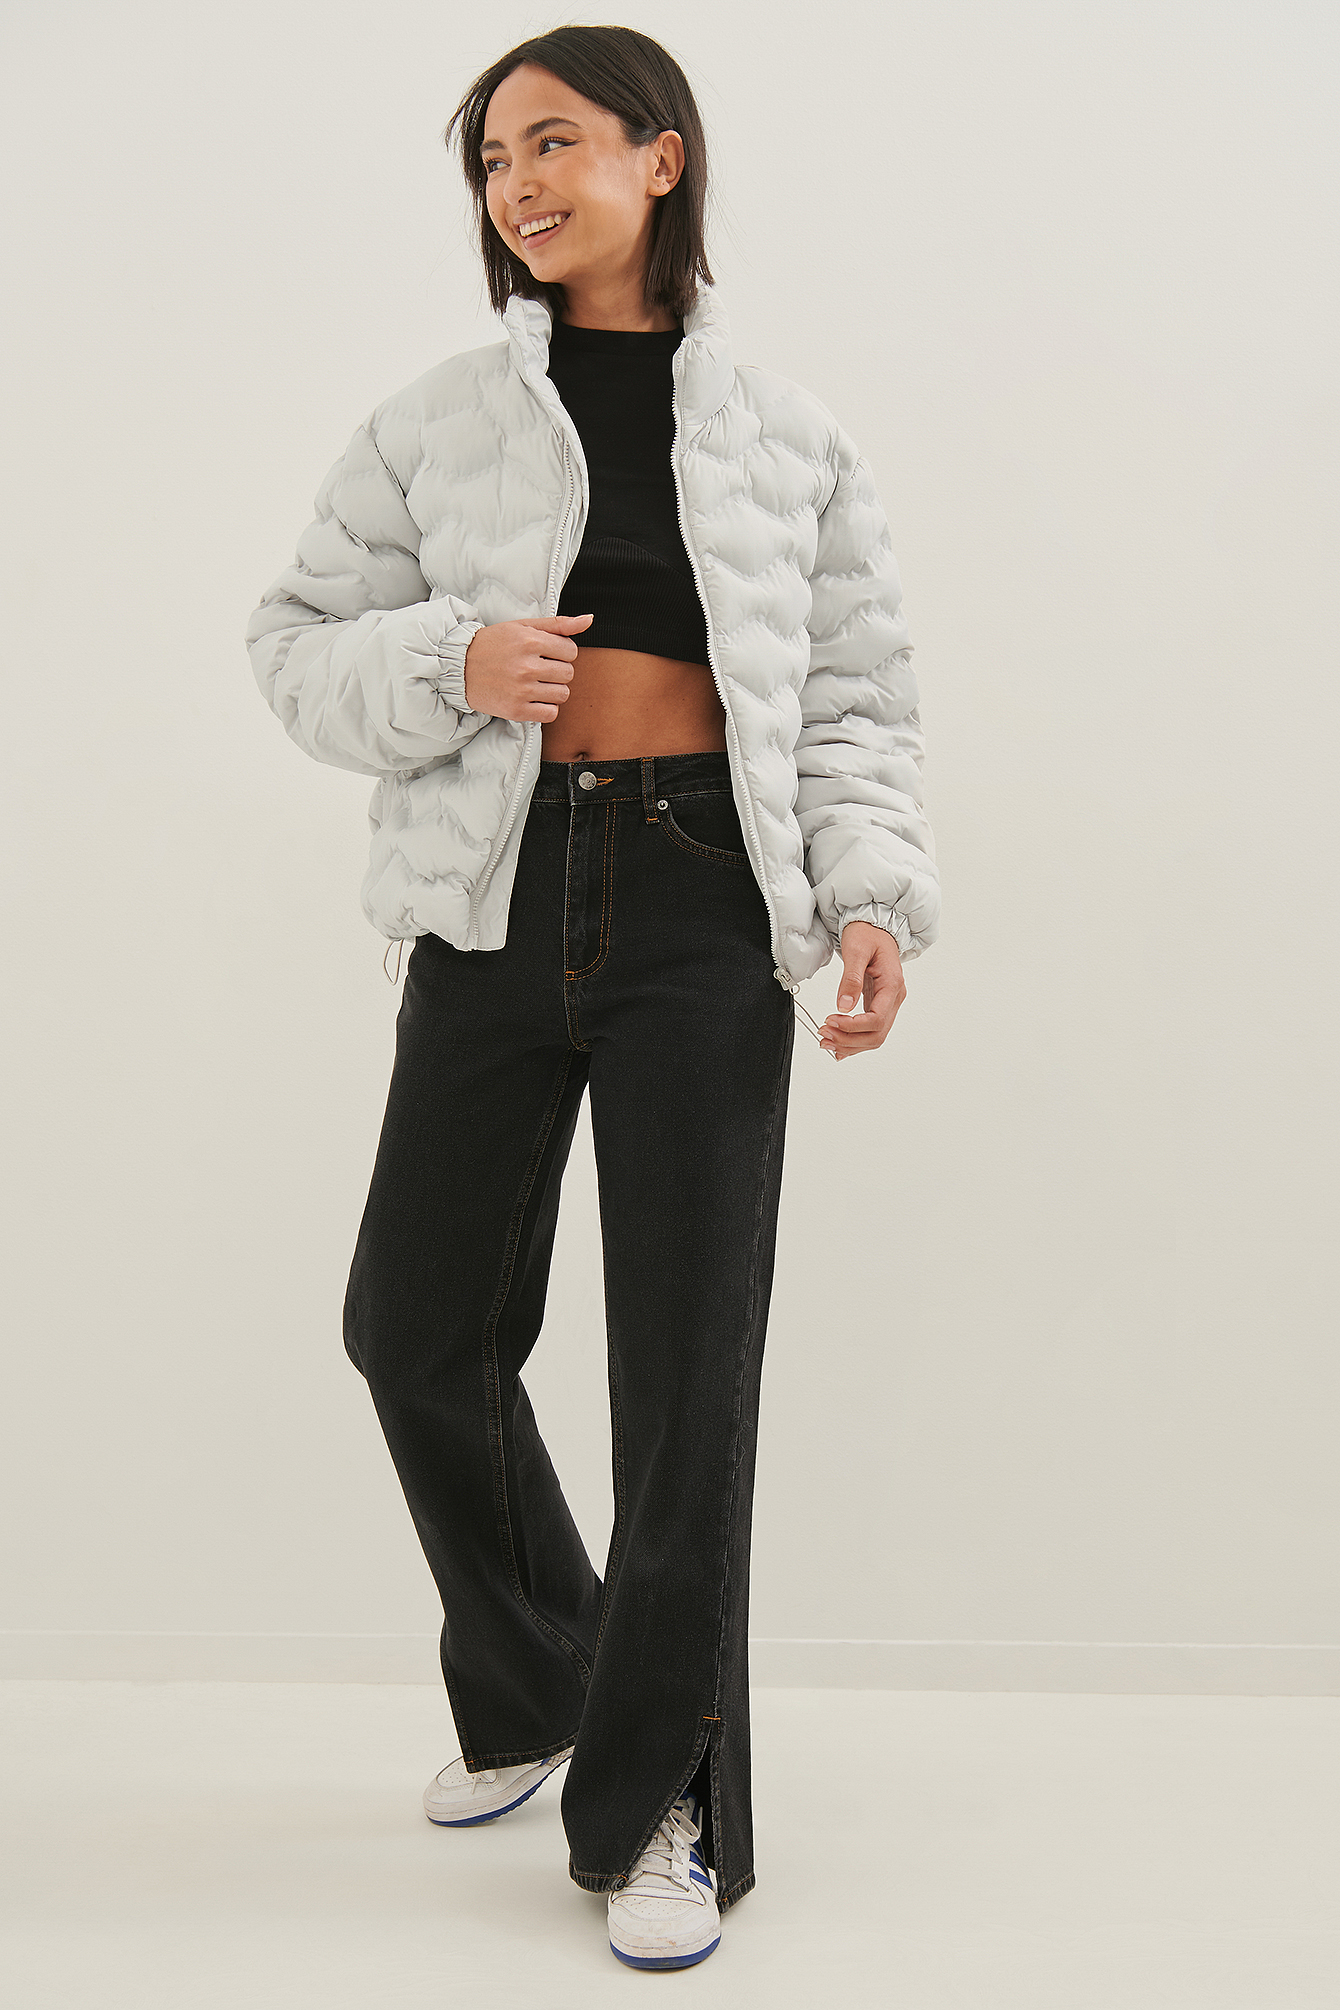 Wavy Short Puffer Jacket Outfit.